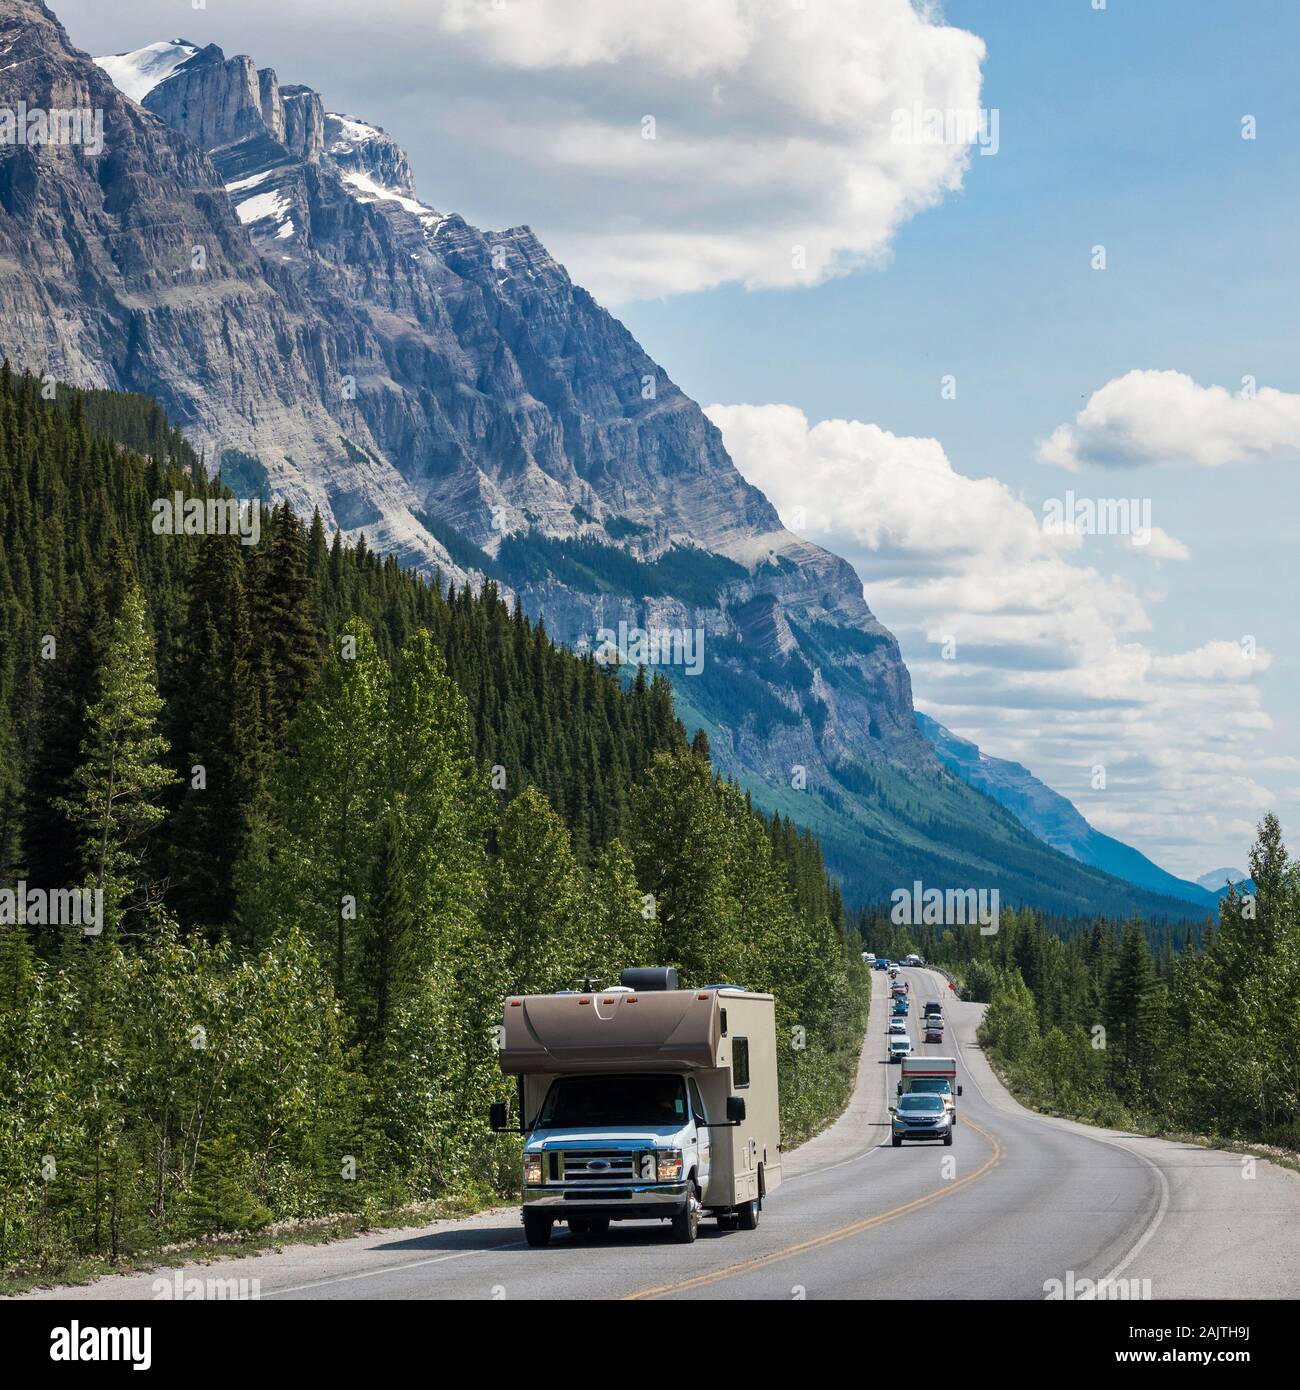 Vehicles driving down the iconic Icefields Parkway route between Banff and Jasper National Parks in Alberta, Canada. Stock Photo